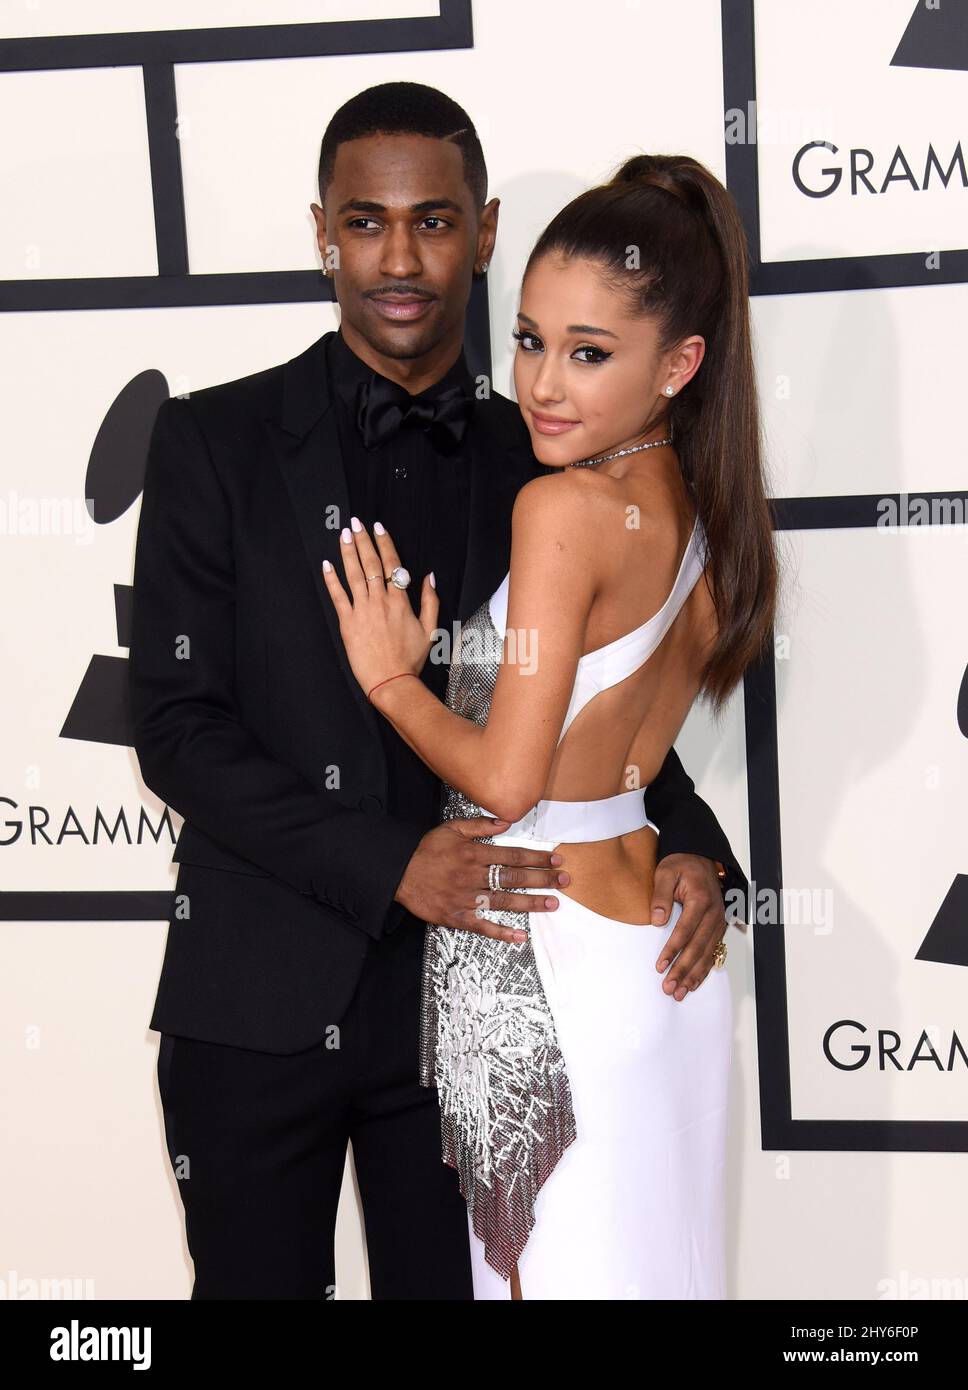 Ariana Grande attends the 57th Annual Grammy Awards at the Staples Center  in Los Angeles, CA, USA, on February 8, 2015. She is wearing a dress by  Versace. Photo by Lionel Hahn/ABACAPRESS.COM